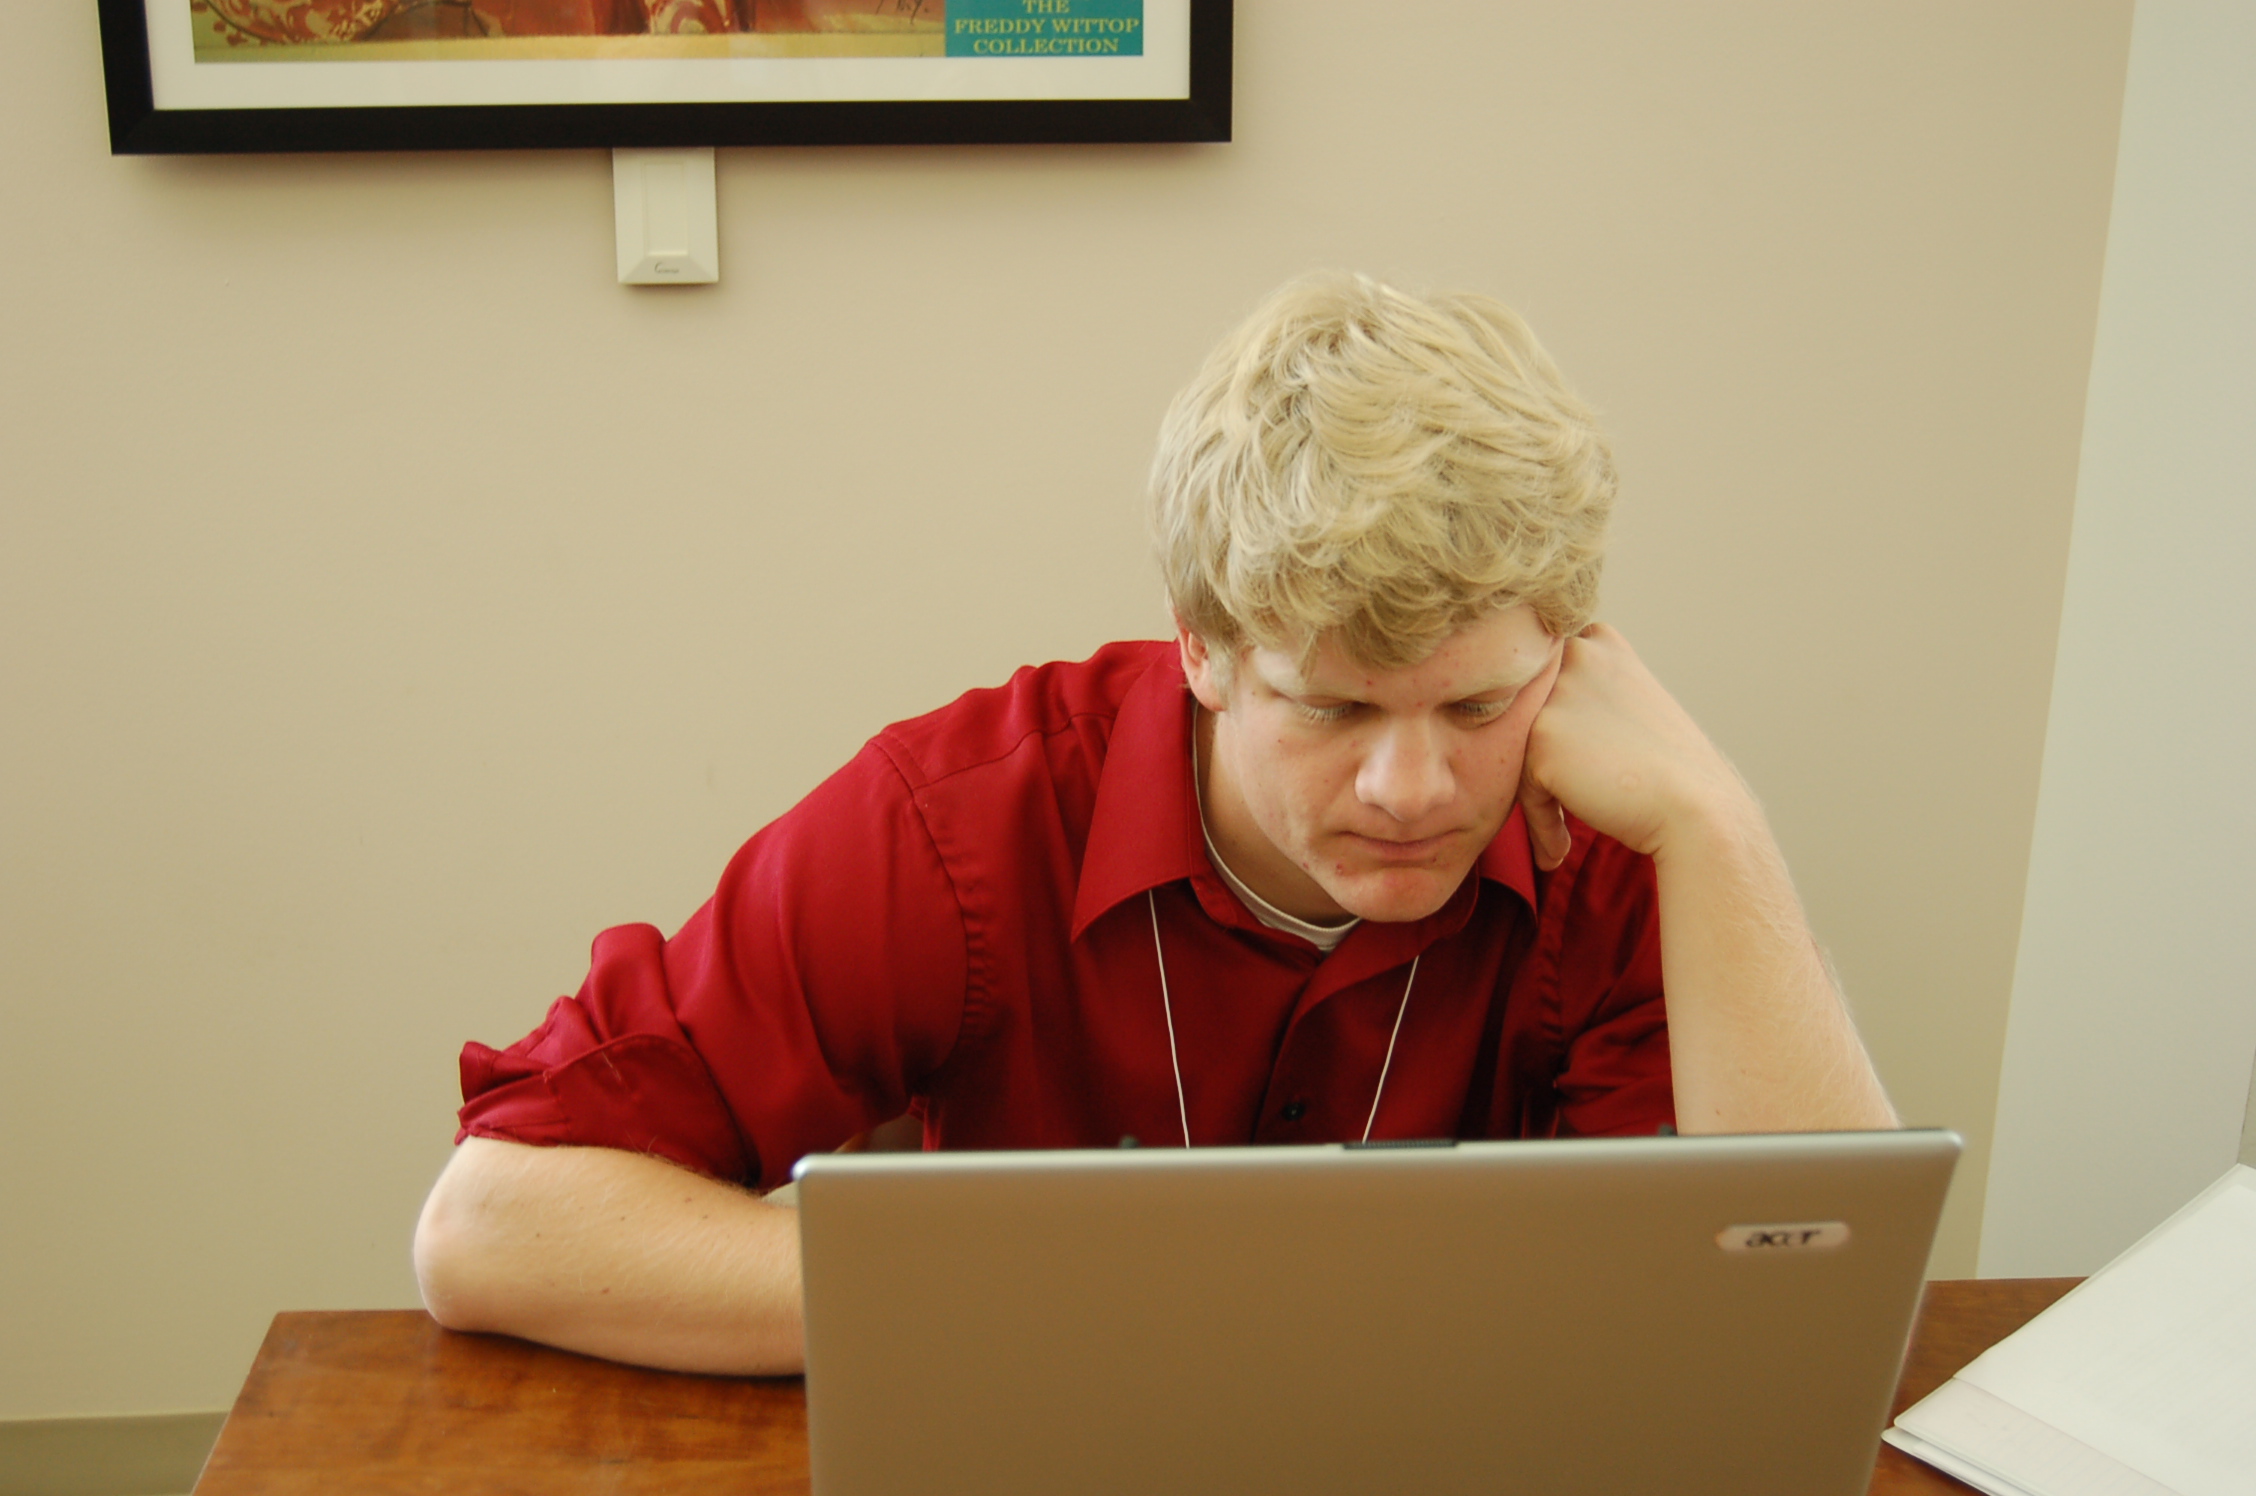 man wearing a red shirt is sitting at a desk looking at his laptop